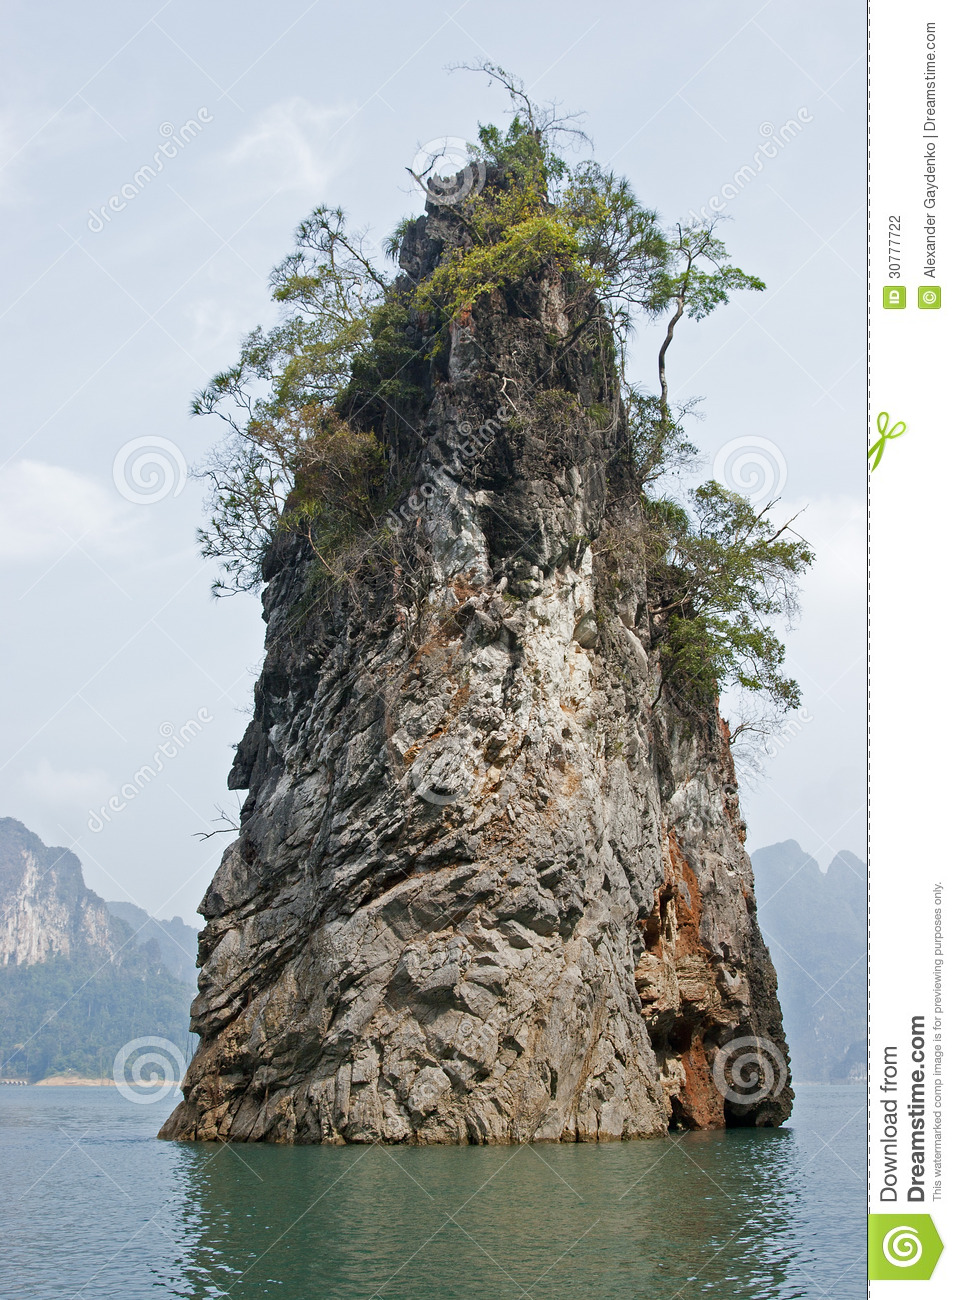 Giant Solid Rock Forming An Island In The Middle Of A Lake 